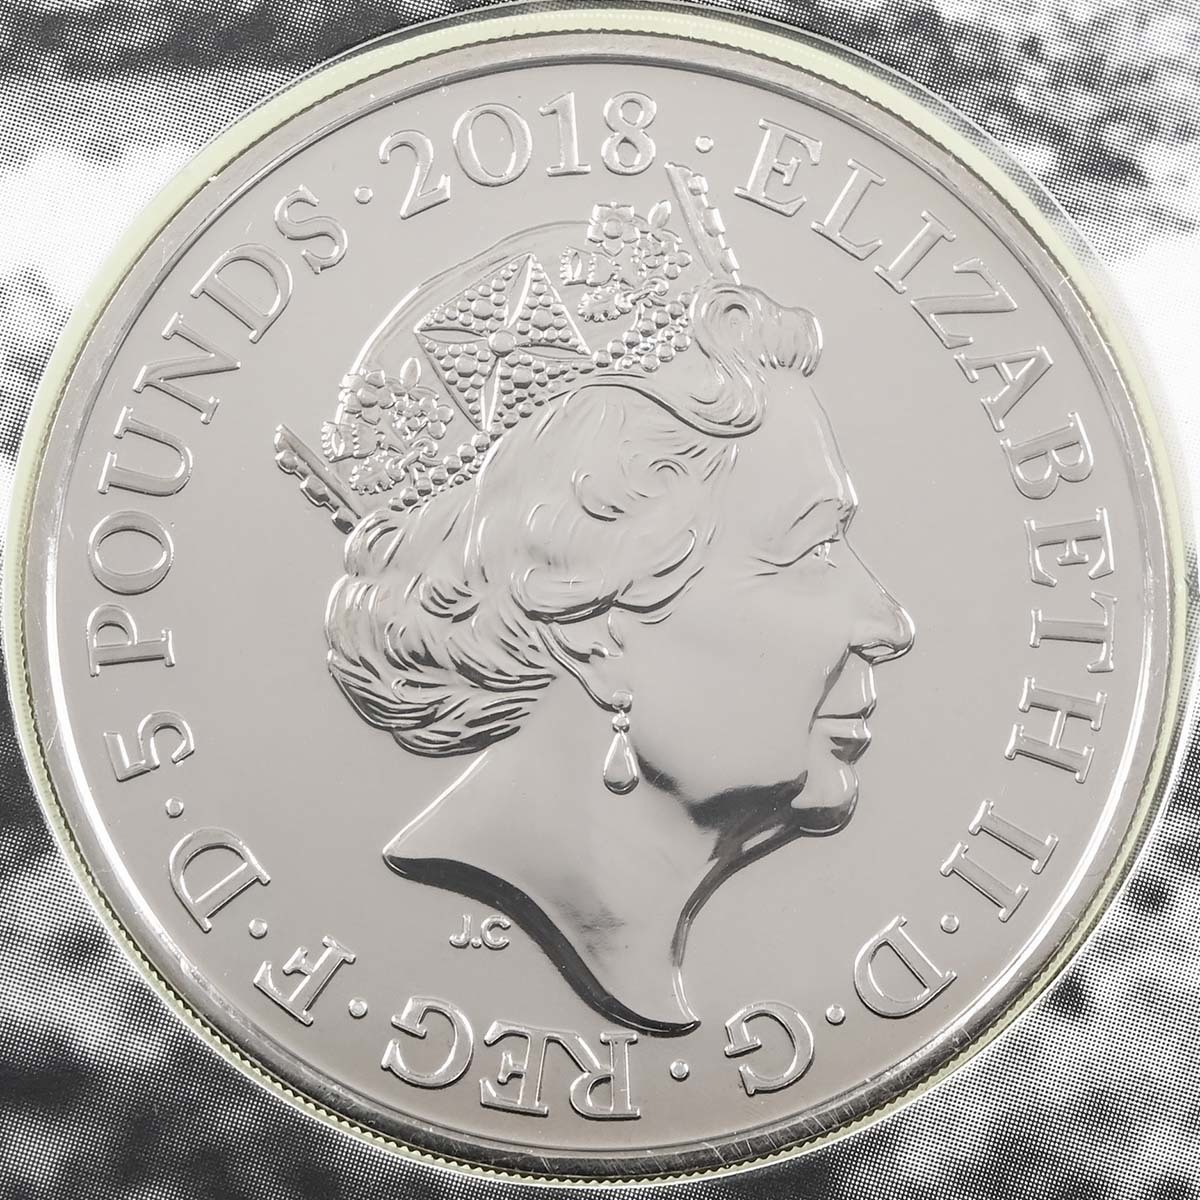 UK18RDBU 2018 Remembrance Day Five Pound Crown Brilliant Uncirculated Coin In Folder Obverse